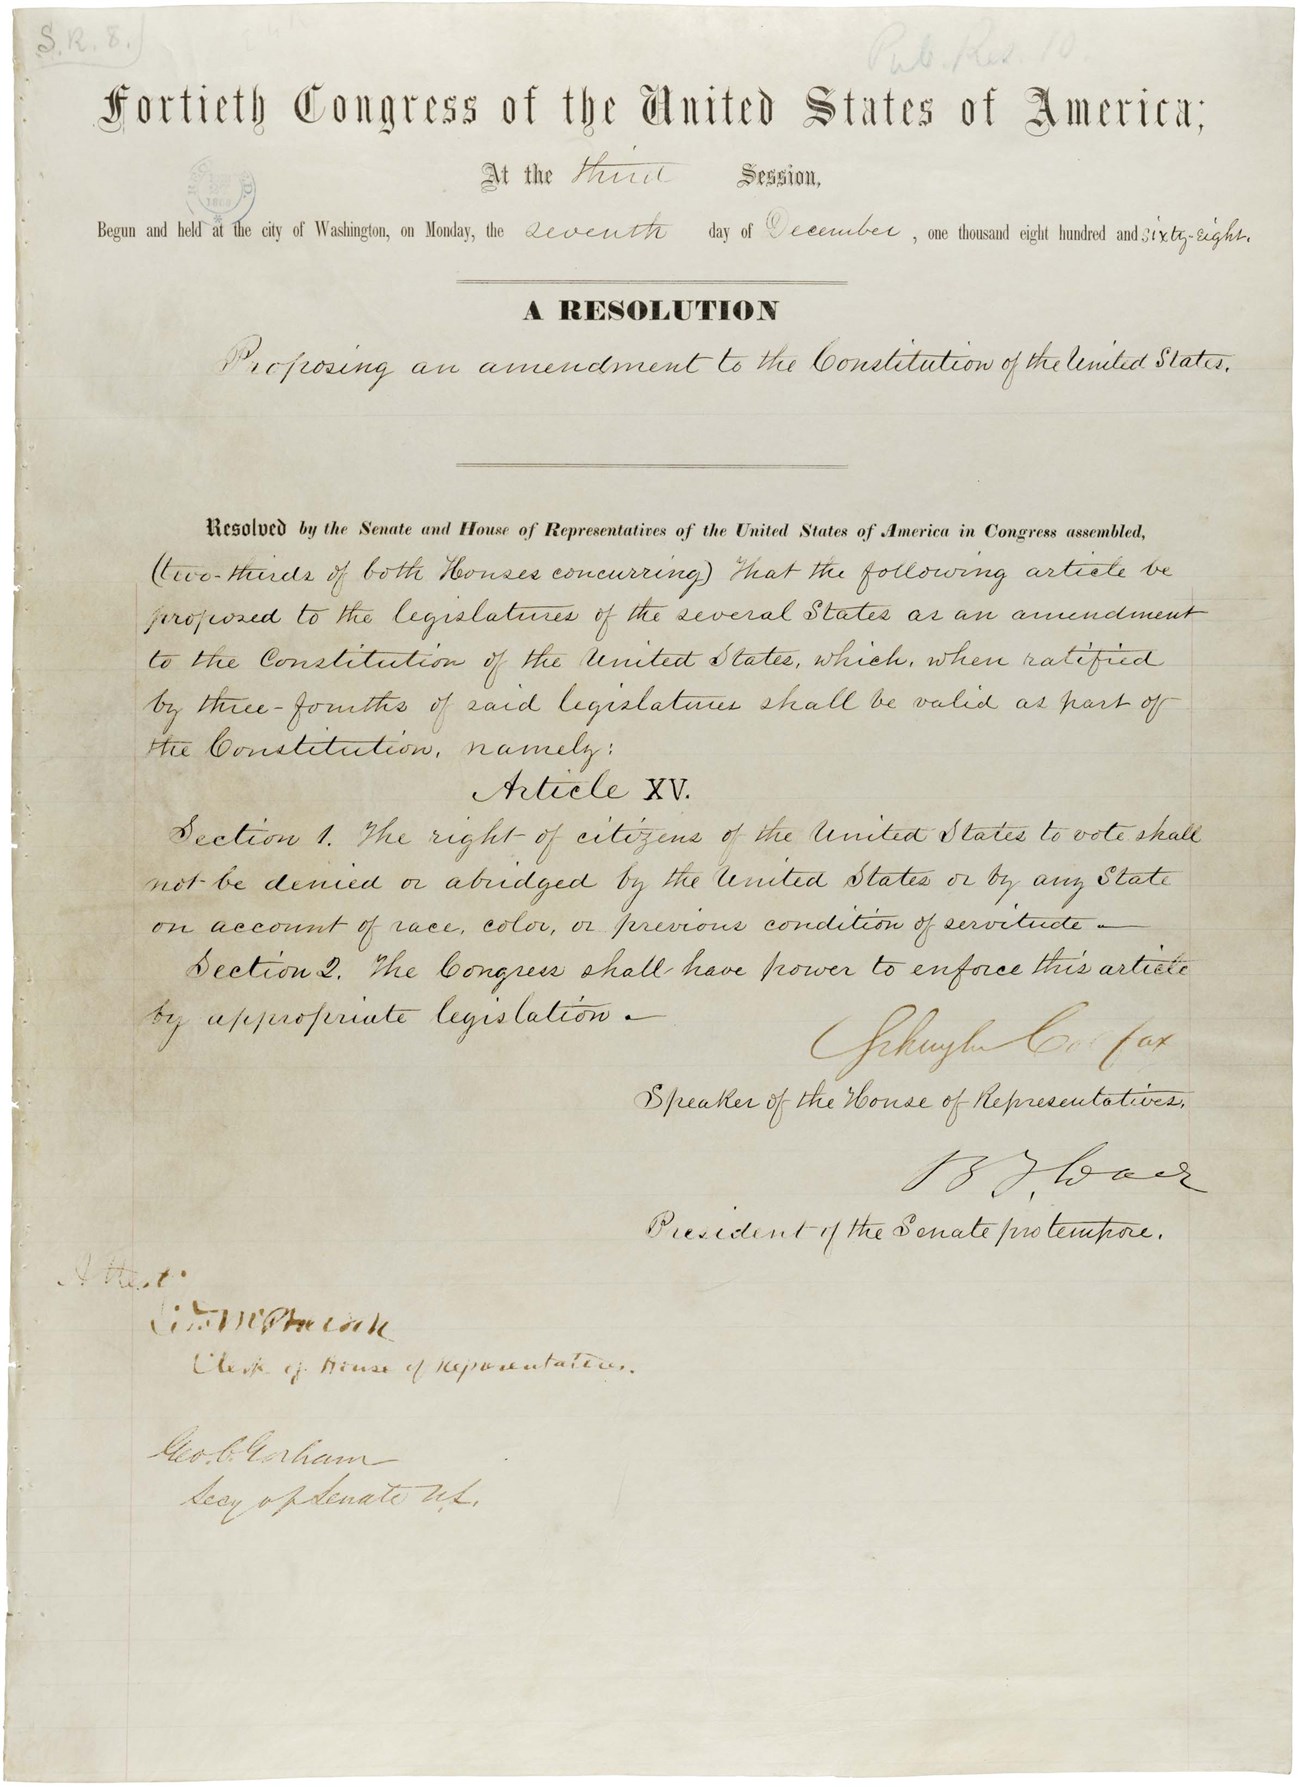 First page of the 15th Amendment, partially printed, partially hand-written. The top line reads "Fortieth Congress of the United States of America."